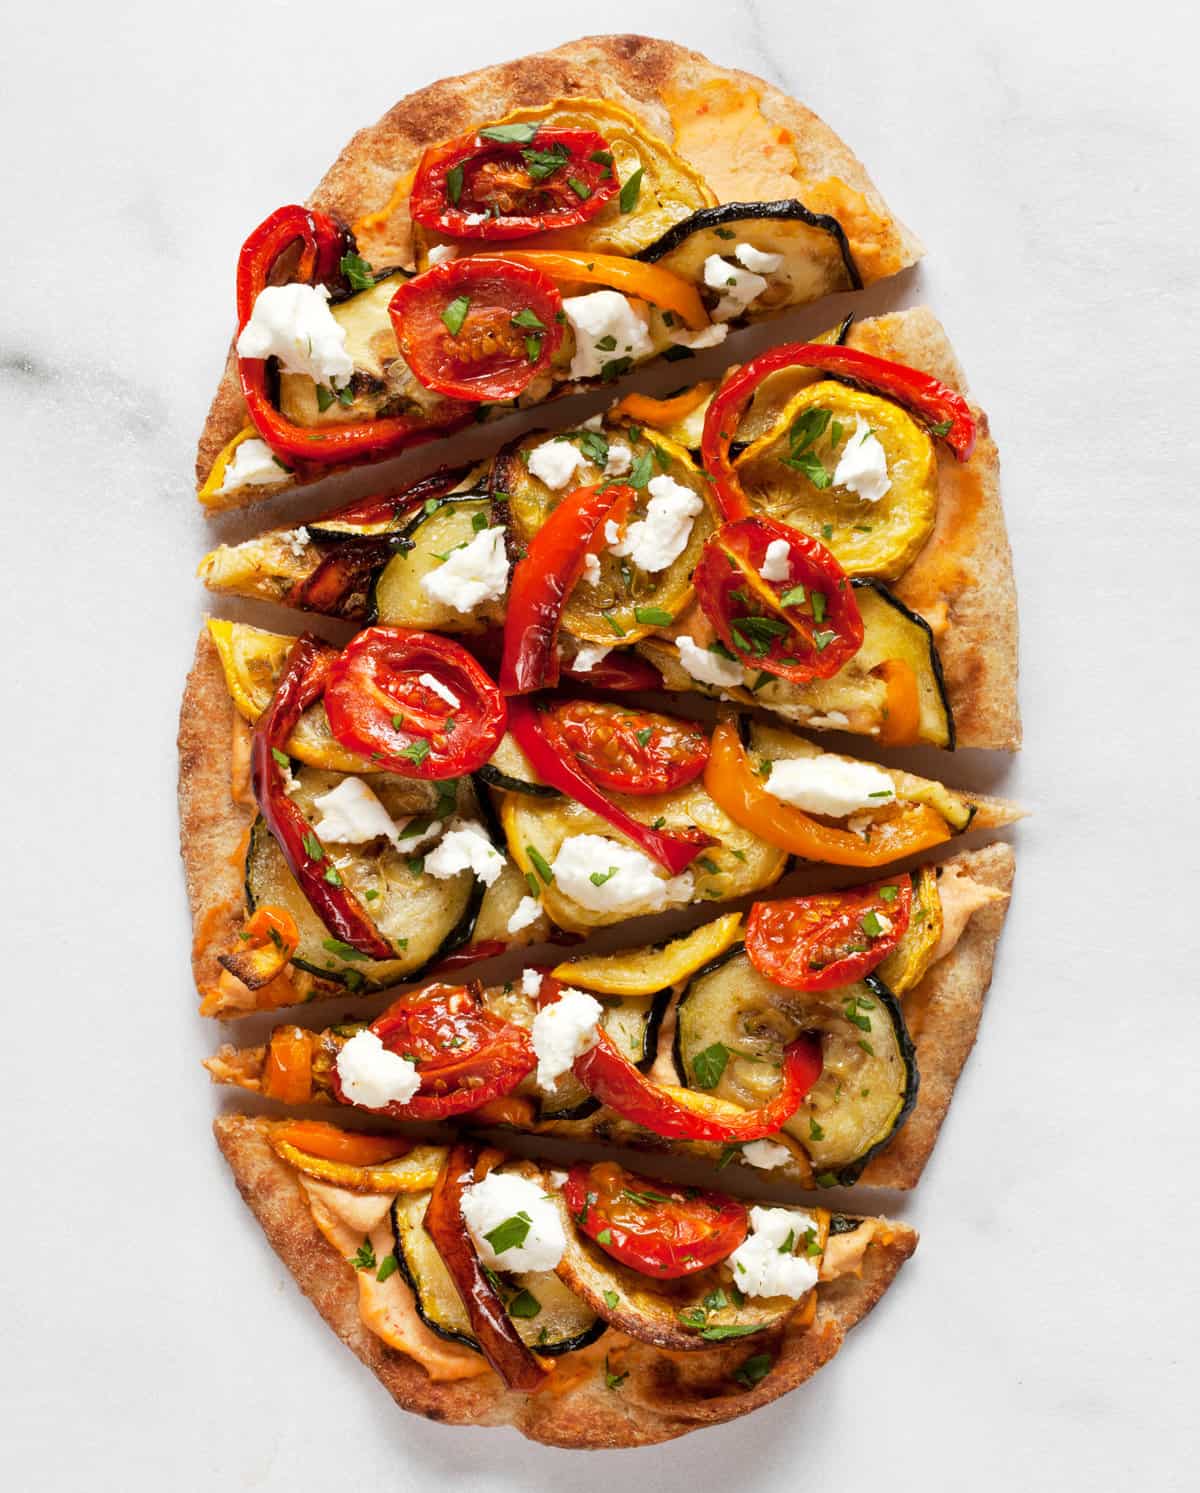 Sliced naan flatbread with vegetables.